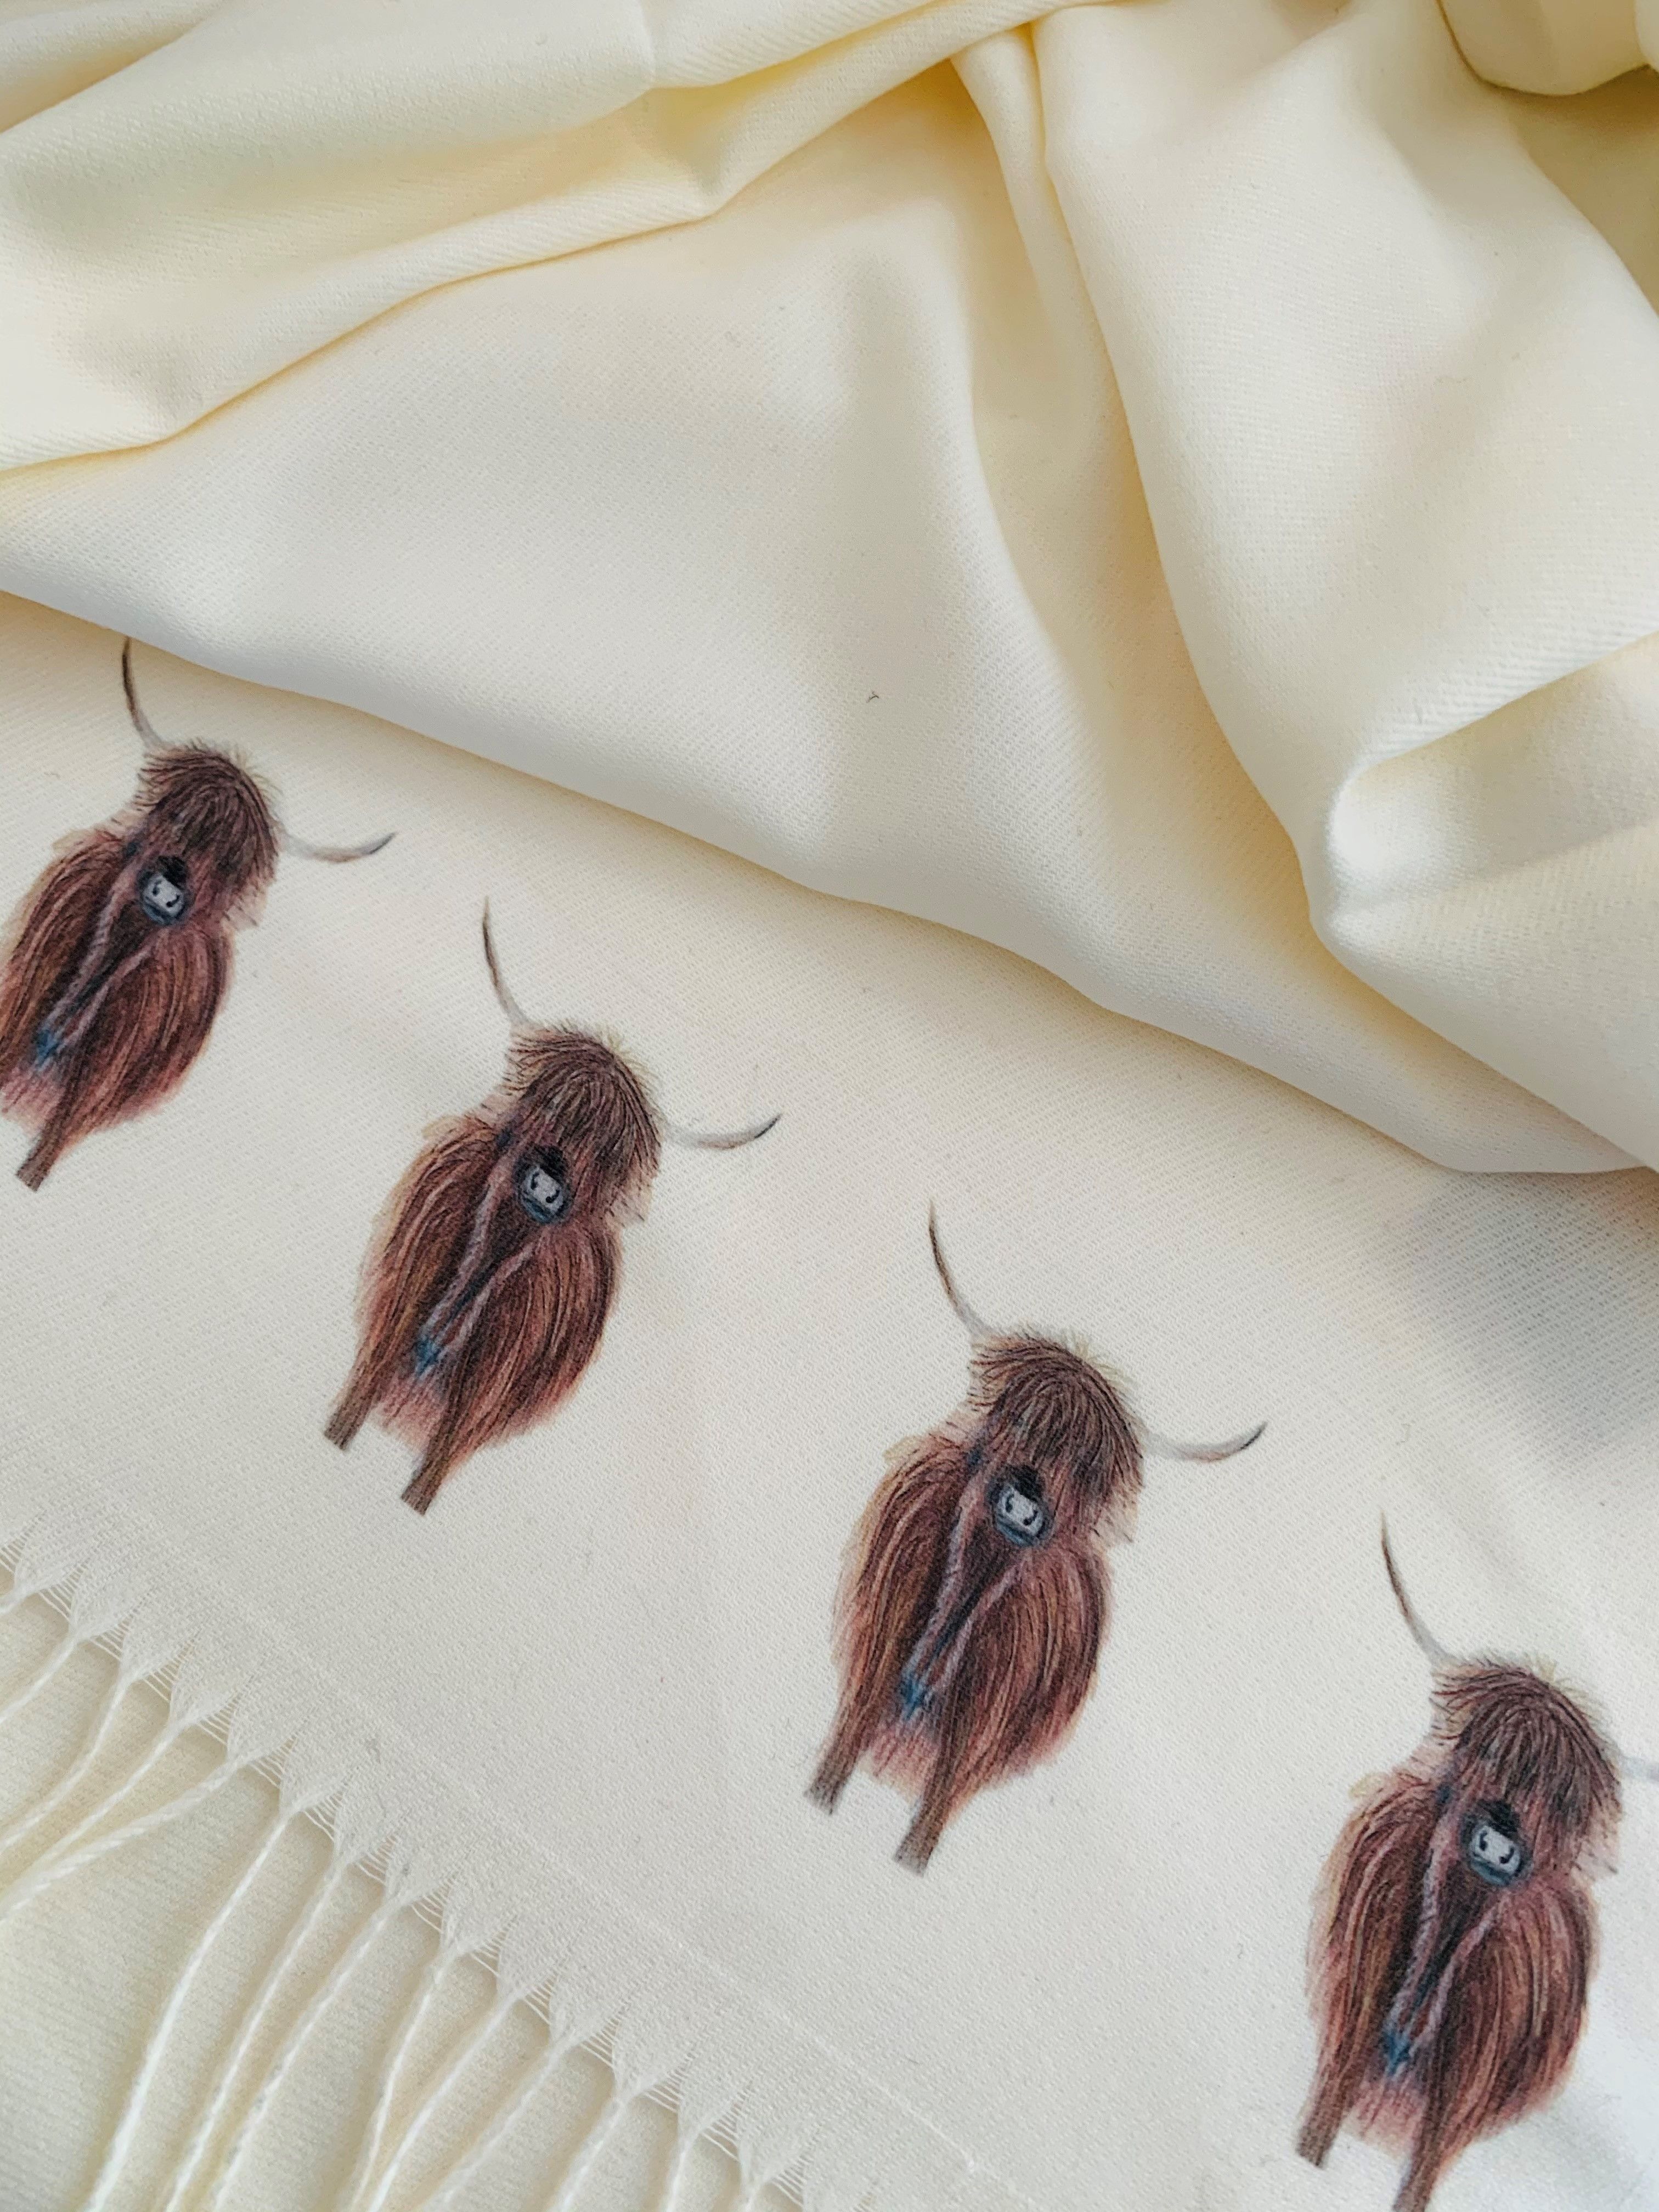 Highland Cows Handprinted on a Cashmere Blend Scarf